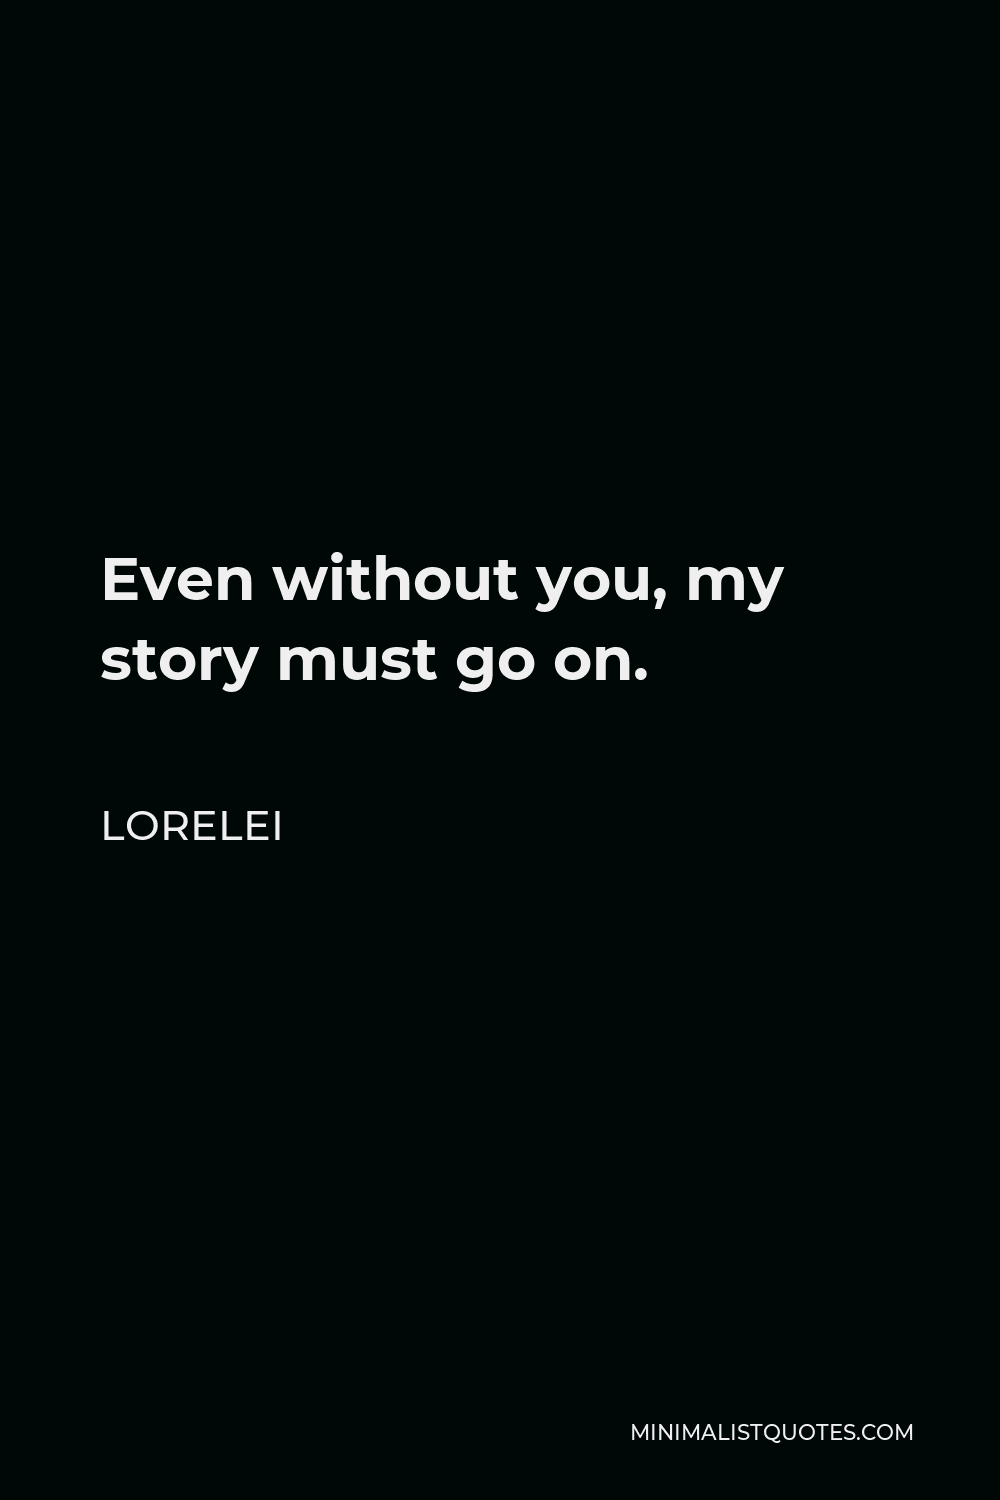 Lorelei Quote - Even without you, my story must go on.